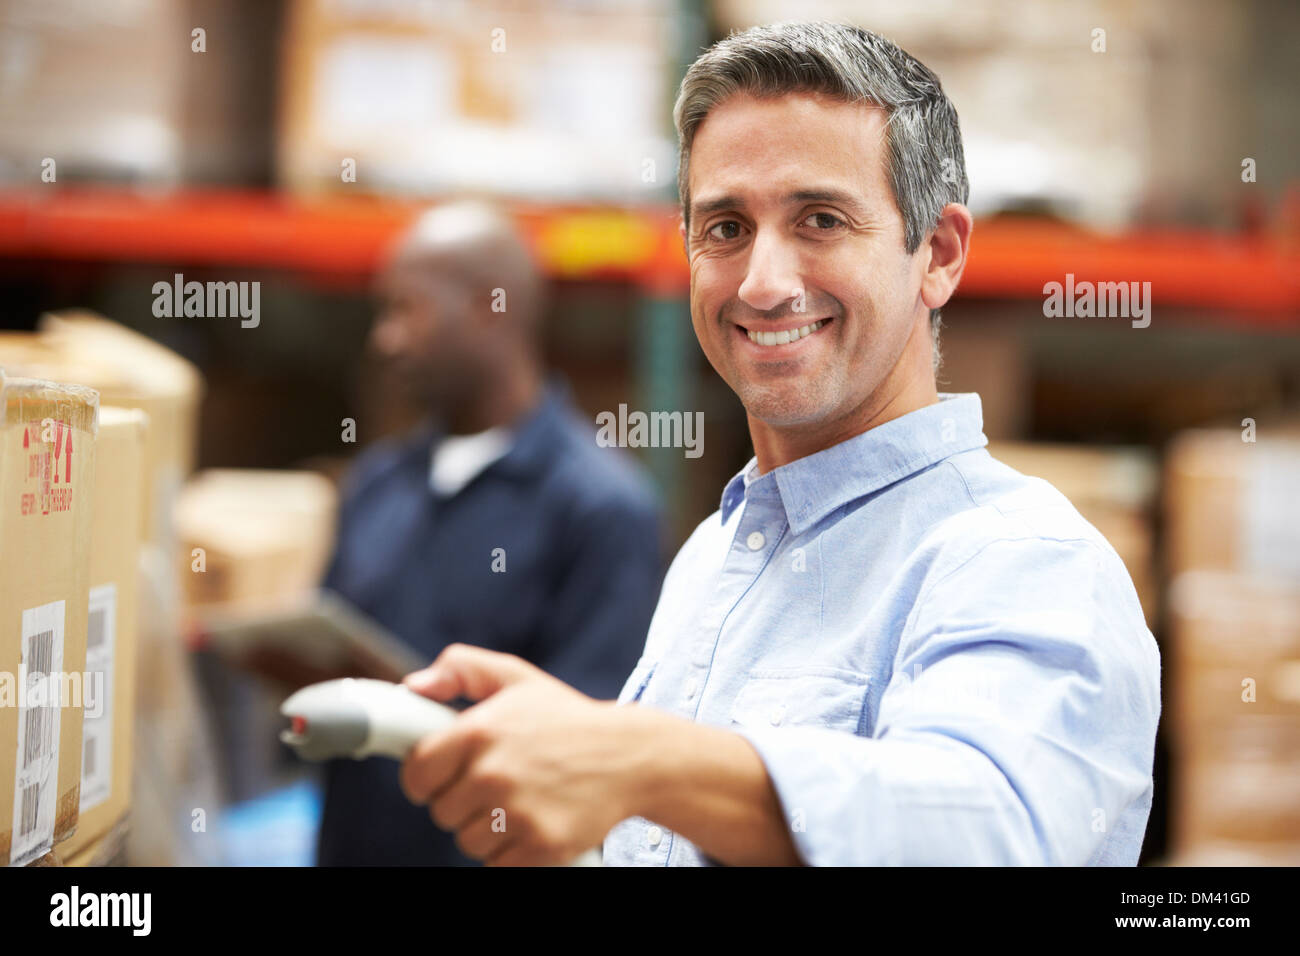 Worker Scanning Package In Warehouse Stock Photo